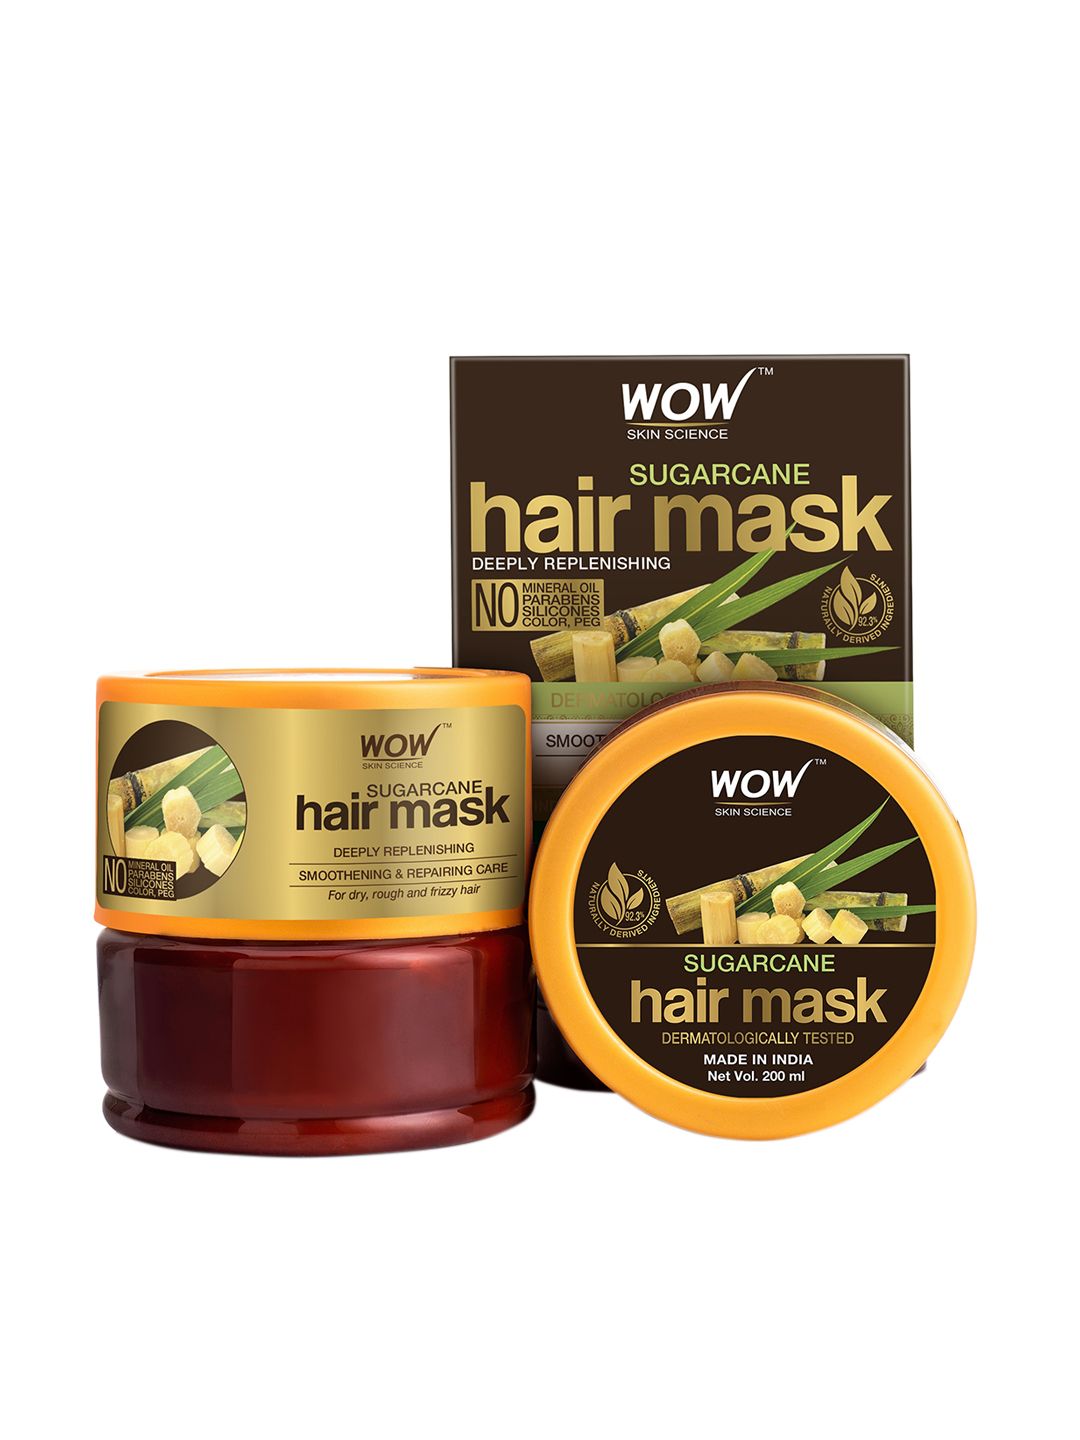 WOW SKIN SCIENCE Deeply Replenishing Sugarcane Hair Mask - 200 ml Price in India